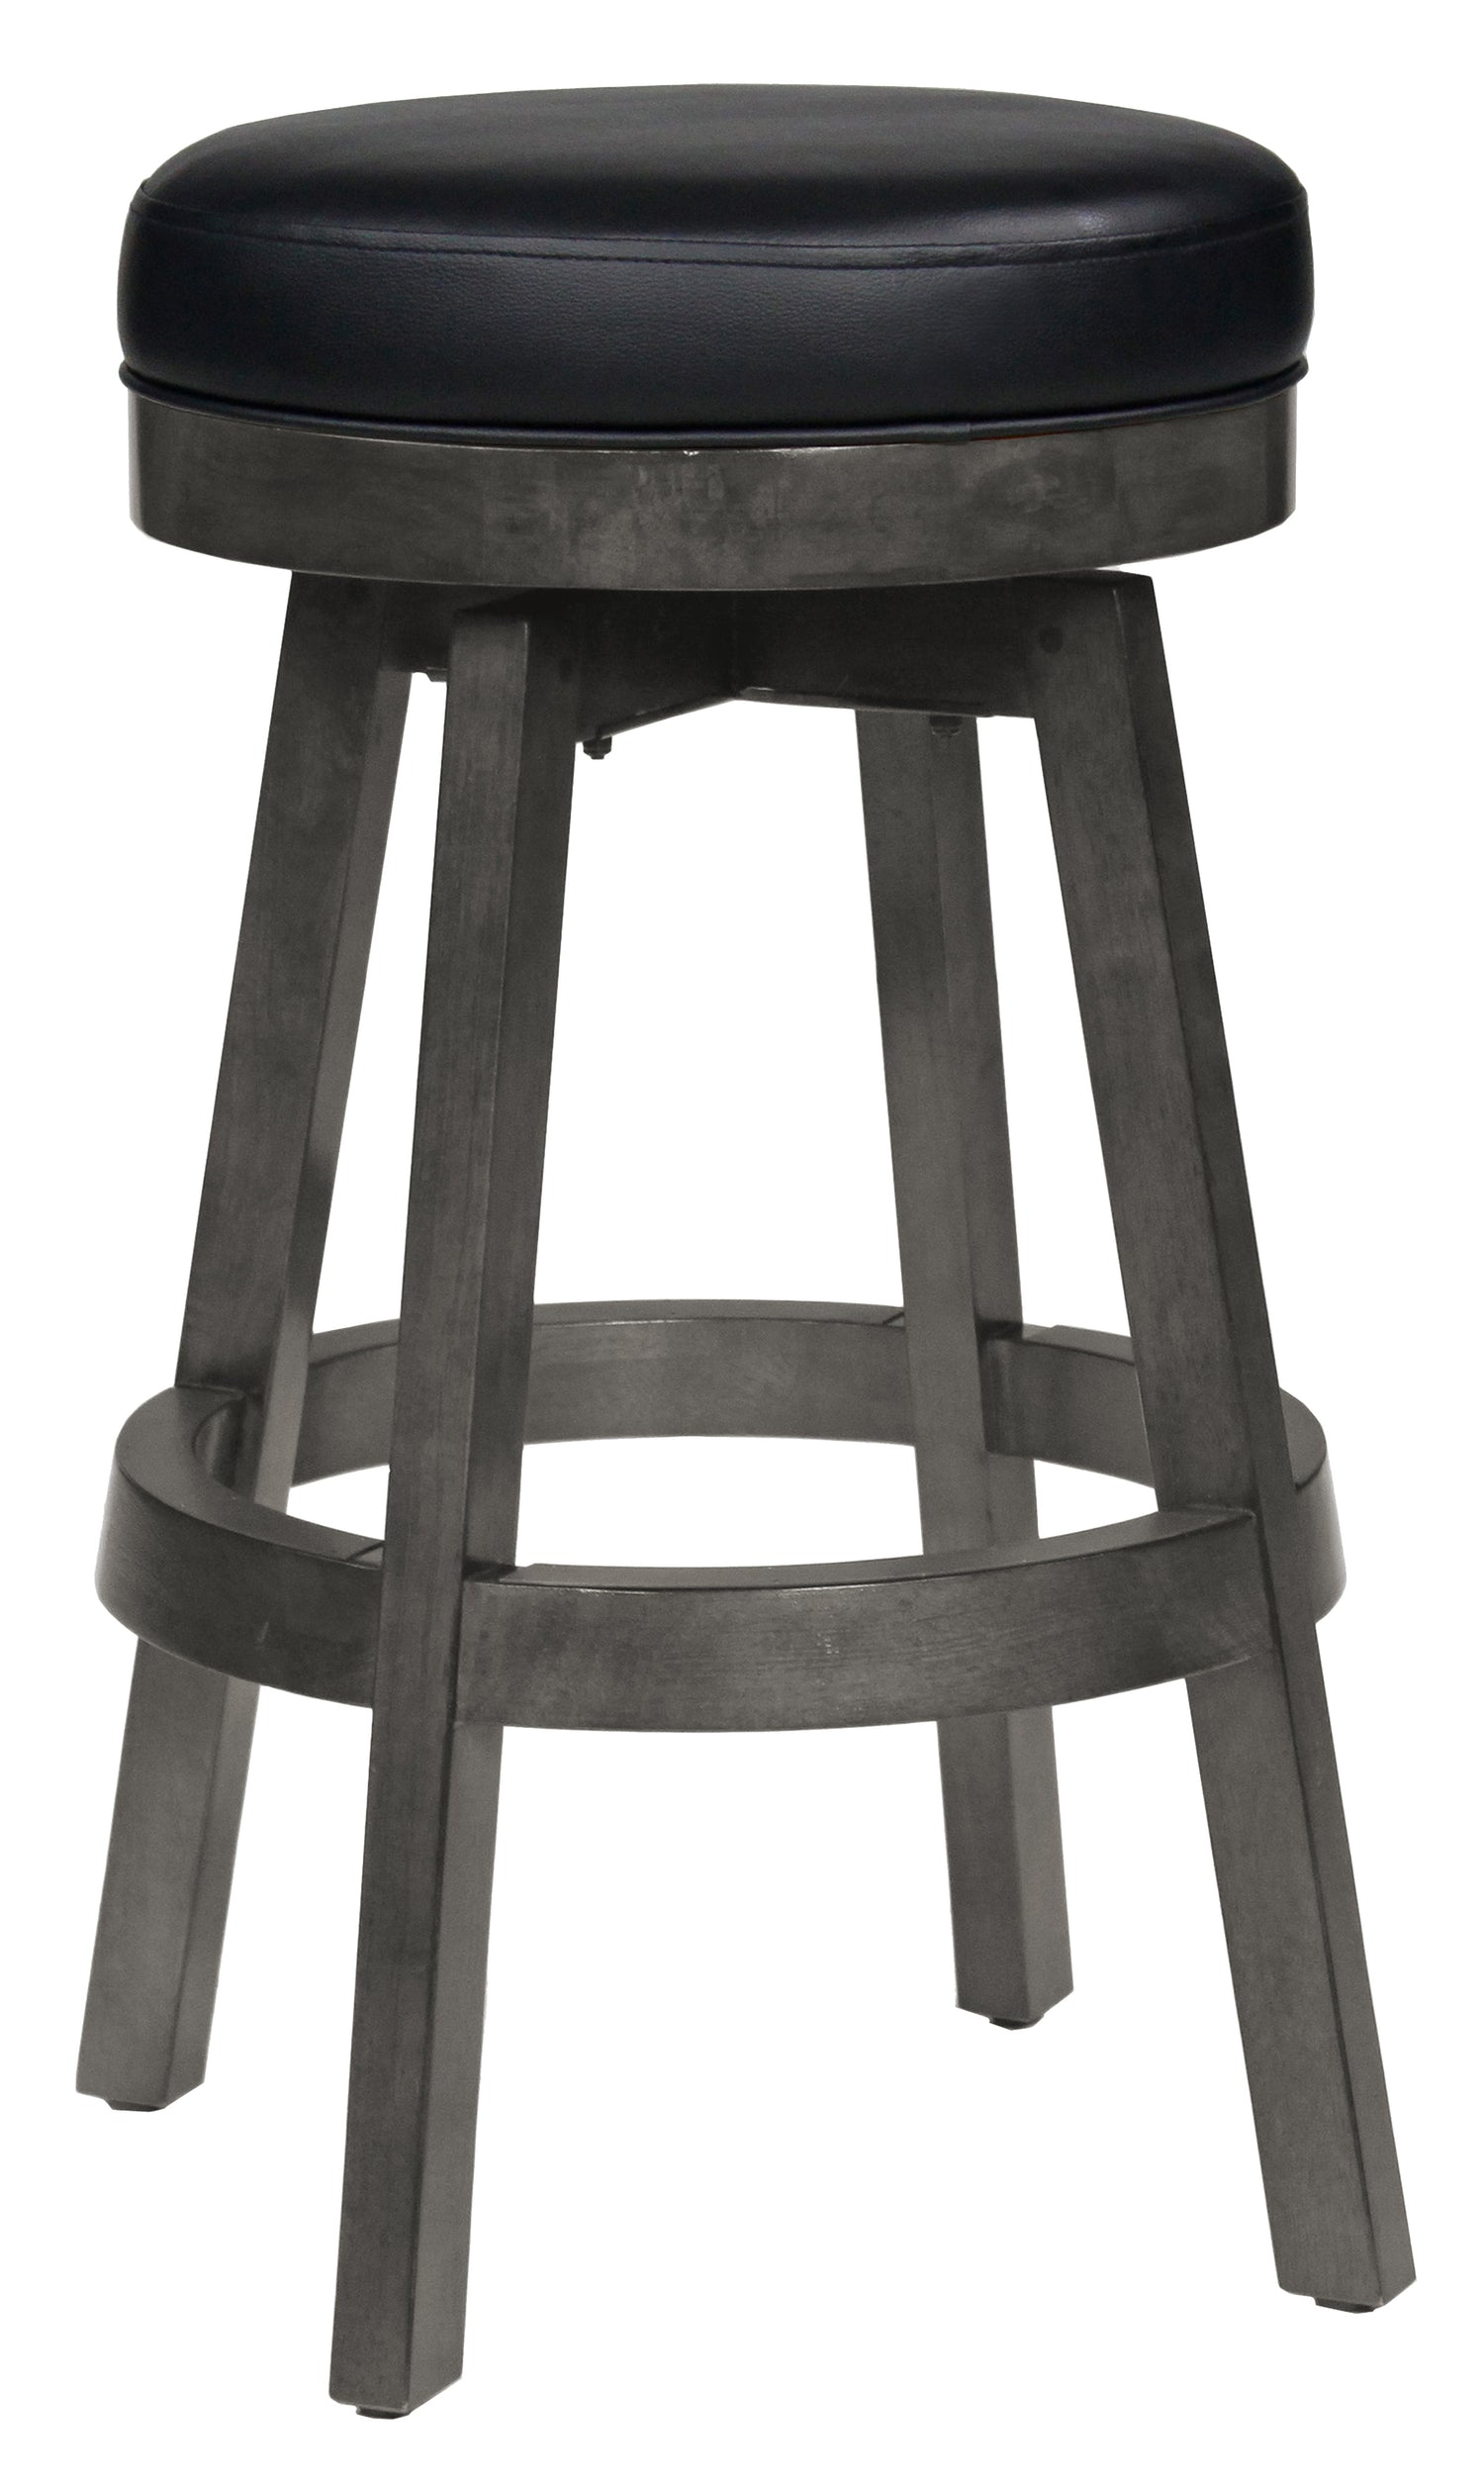 Legacy Billiards Classic Backless Barstool in Shade Finish